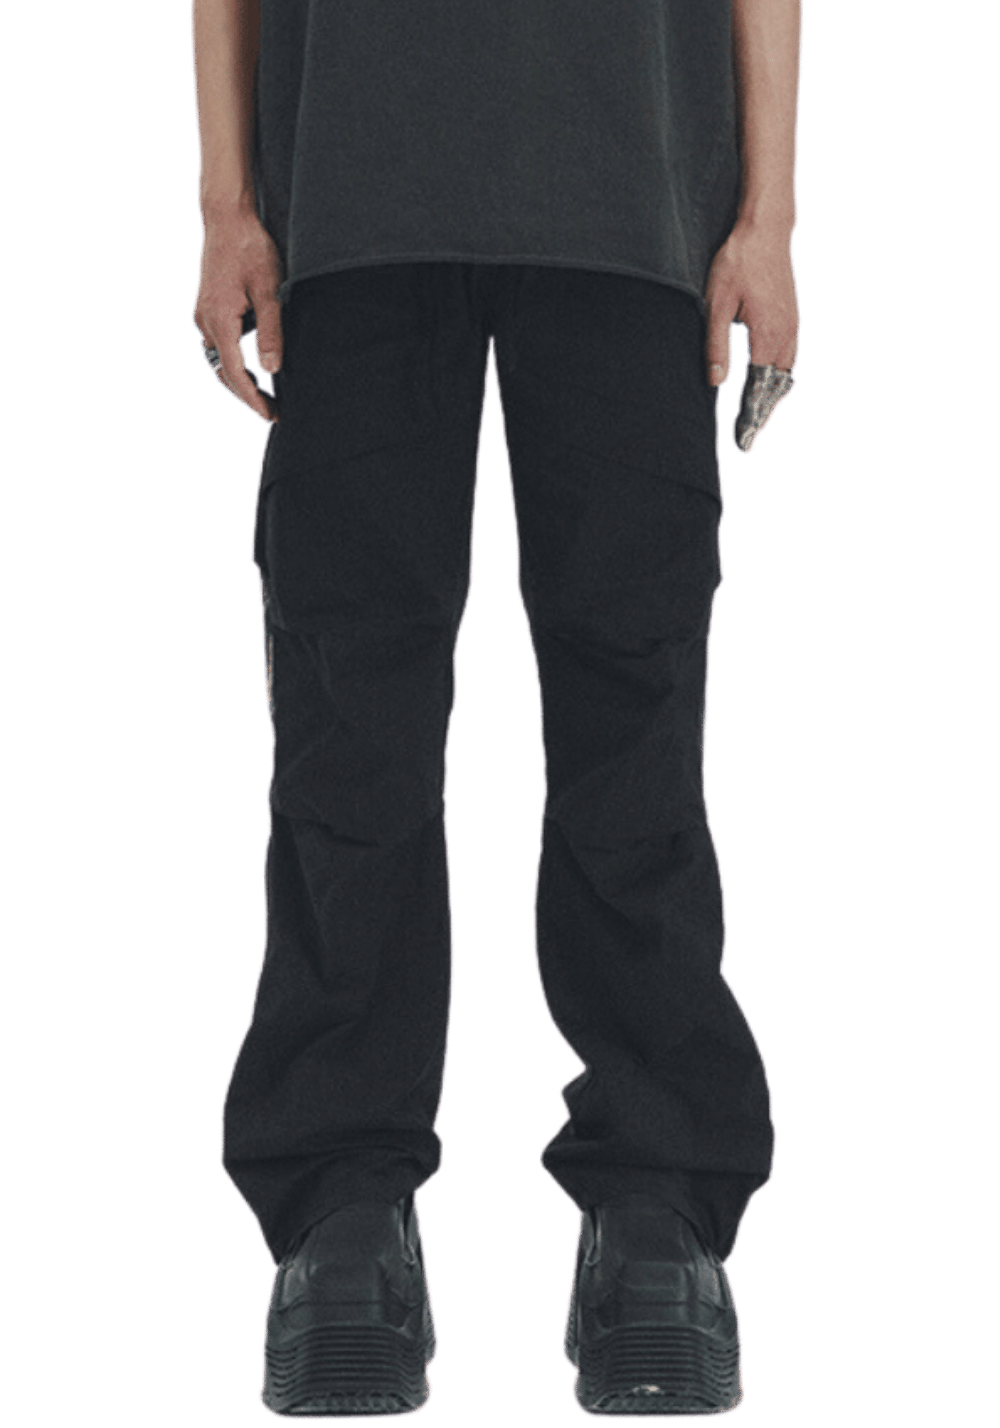 Multi Structured Lightweight Trousers - PSYLOS 1, Multi Structured Lightweight Trousers, Pants, D5ove, PSYLOS 1